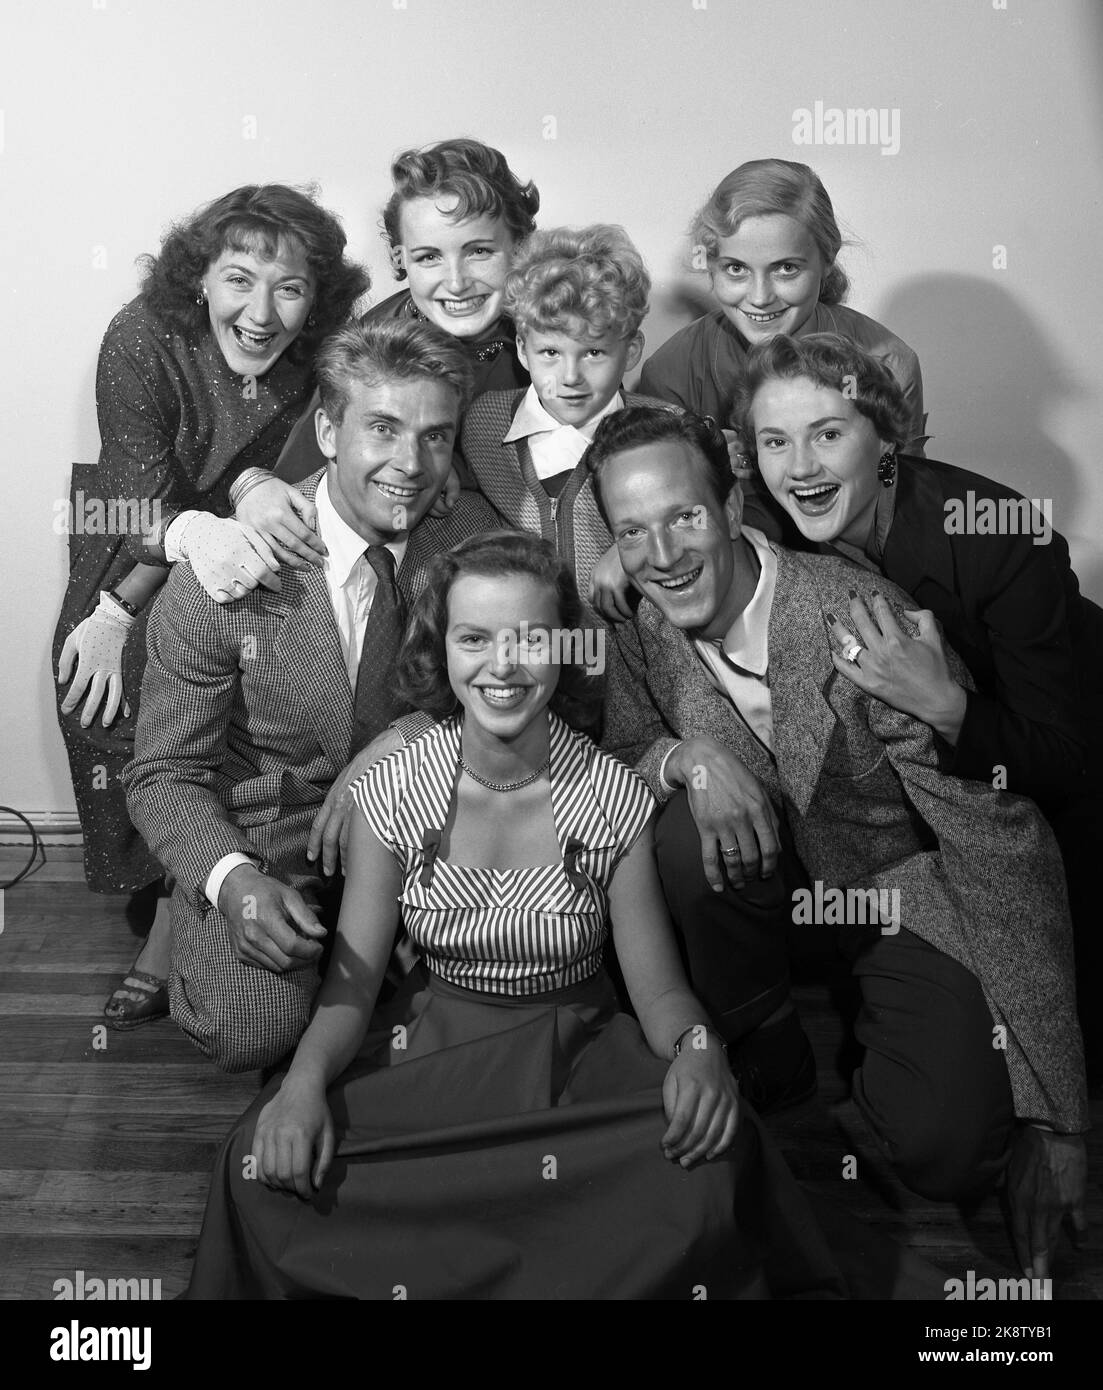 Oslo 1954. 'Nine new film faces.' This bouquet of new, young talents in Norwegian film welcomes 'Current' readers to the autumn film season. In the back row from V A boy's day ”). In the middle from the: Marius Eriksen (ski teacher in 'Trost in the roof lamp'), seven -year -old Bjørn Olav Cook ('a boy's day') and Jan Voigt ('in the name of morals'). Until H .: Karin Hox ('never other than trouble'). Ahead: Vigdis Røising ('never other than trouble'). Photo: Sverre A. Børretzen Stock Photo